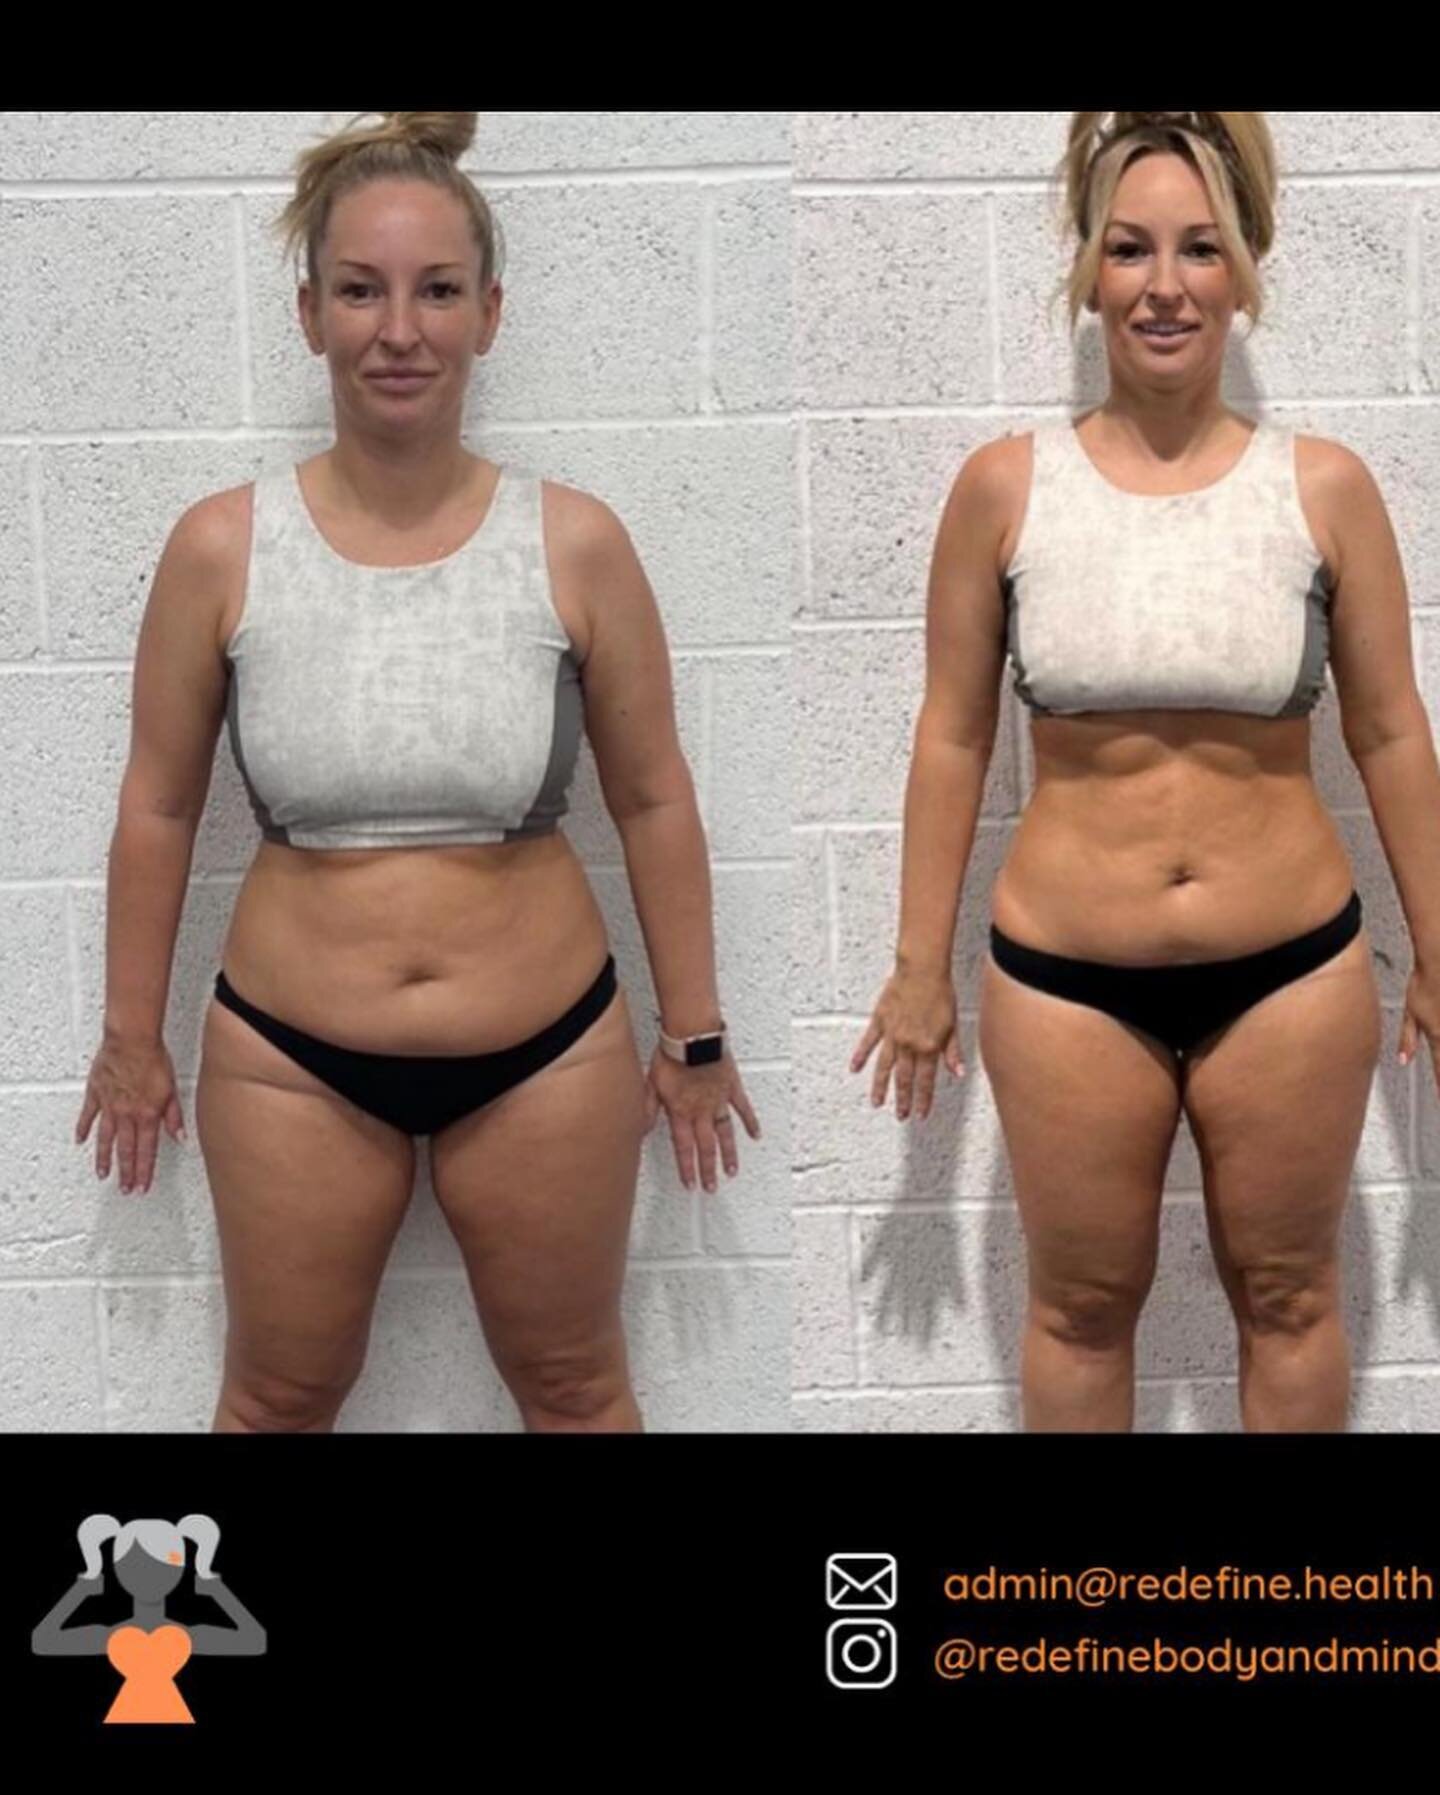 OUR FIRST &lsquo;REDEFINE YOURSELF&rsquo; 12 WEEK CHALLENGE IS NOW COMPLETE!

And to say @lizbamforthcoach and @rebekah_jepson_redefine are happy is an understatement but we wanted our ladies to tell you what they think&hellip;.

First up is our love